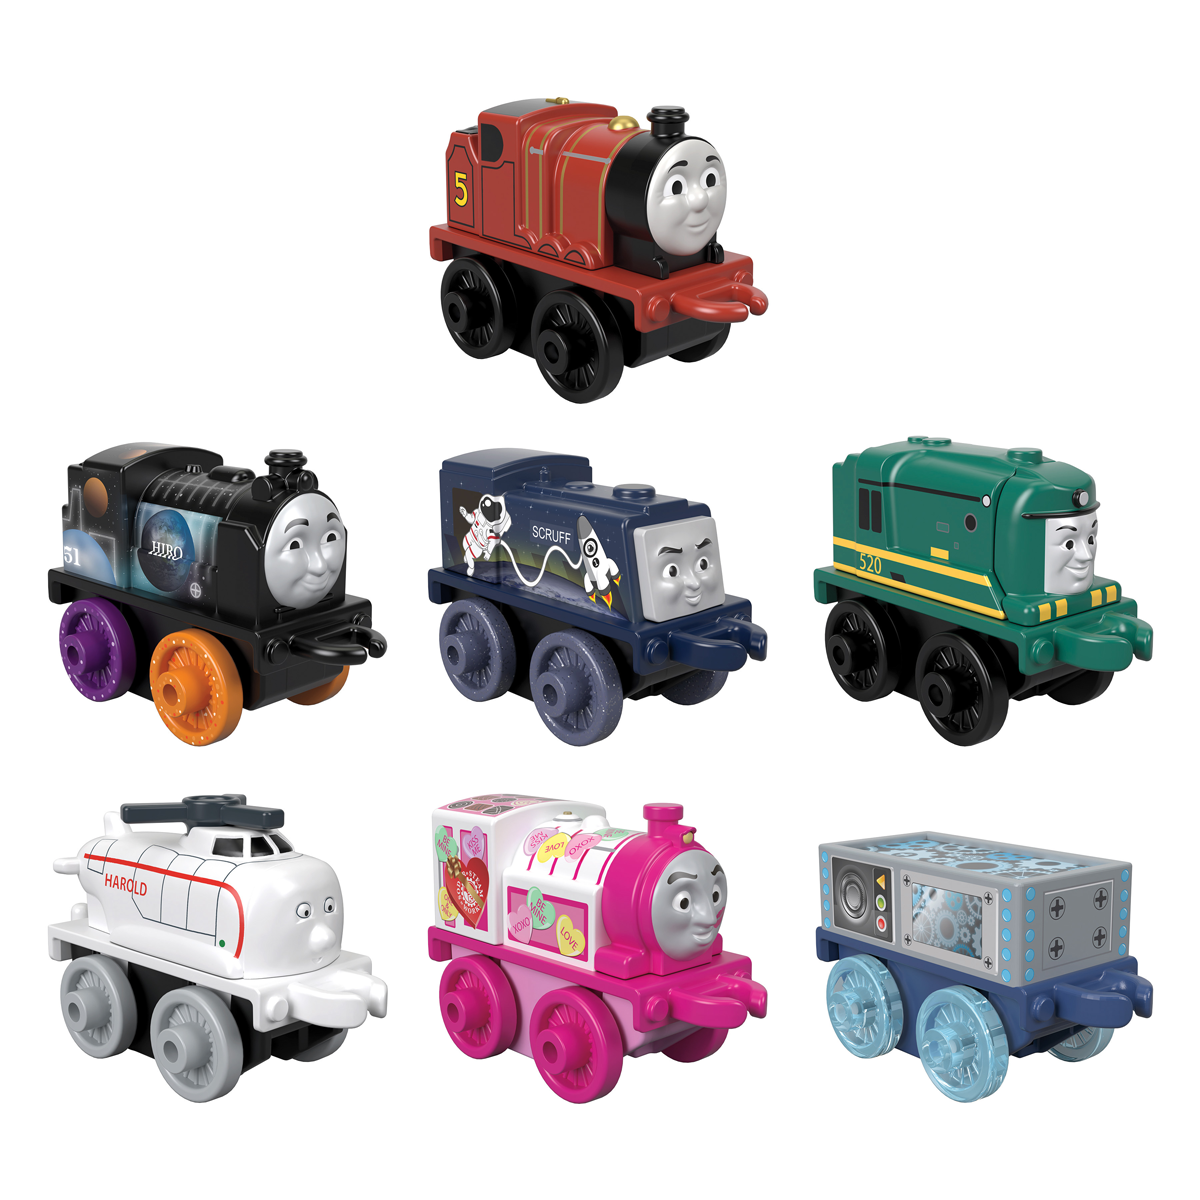 Trains May Very Worlds Coolest Thomas & Friends Minis